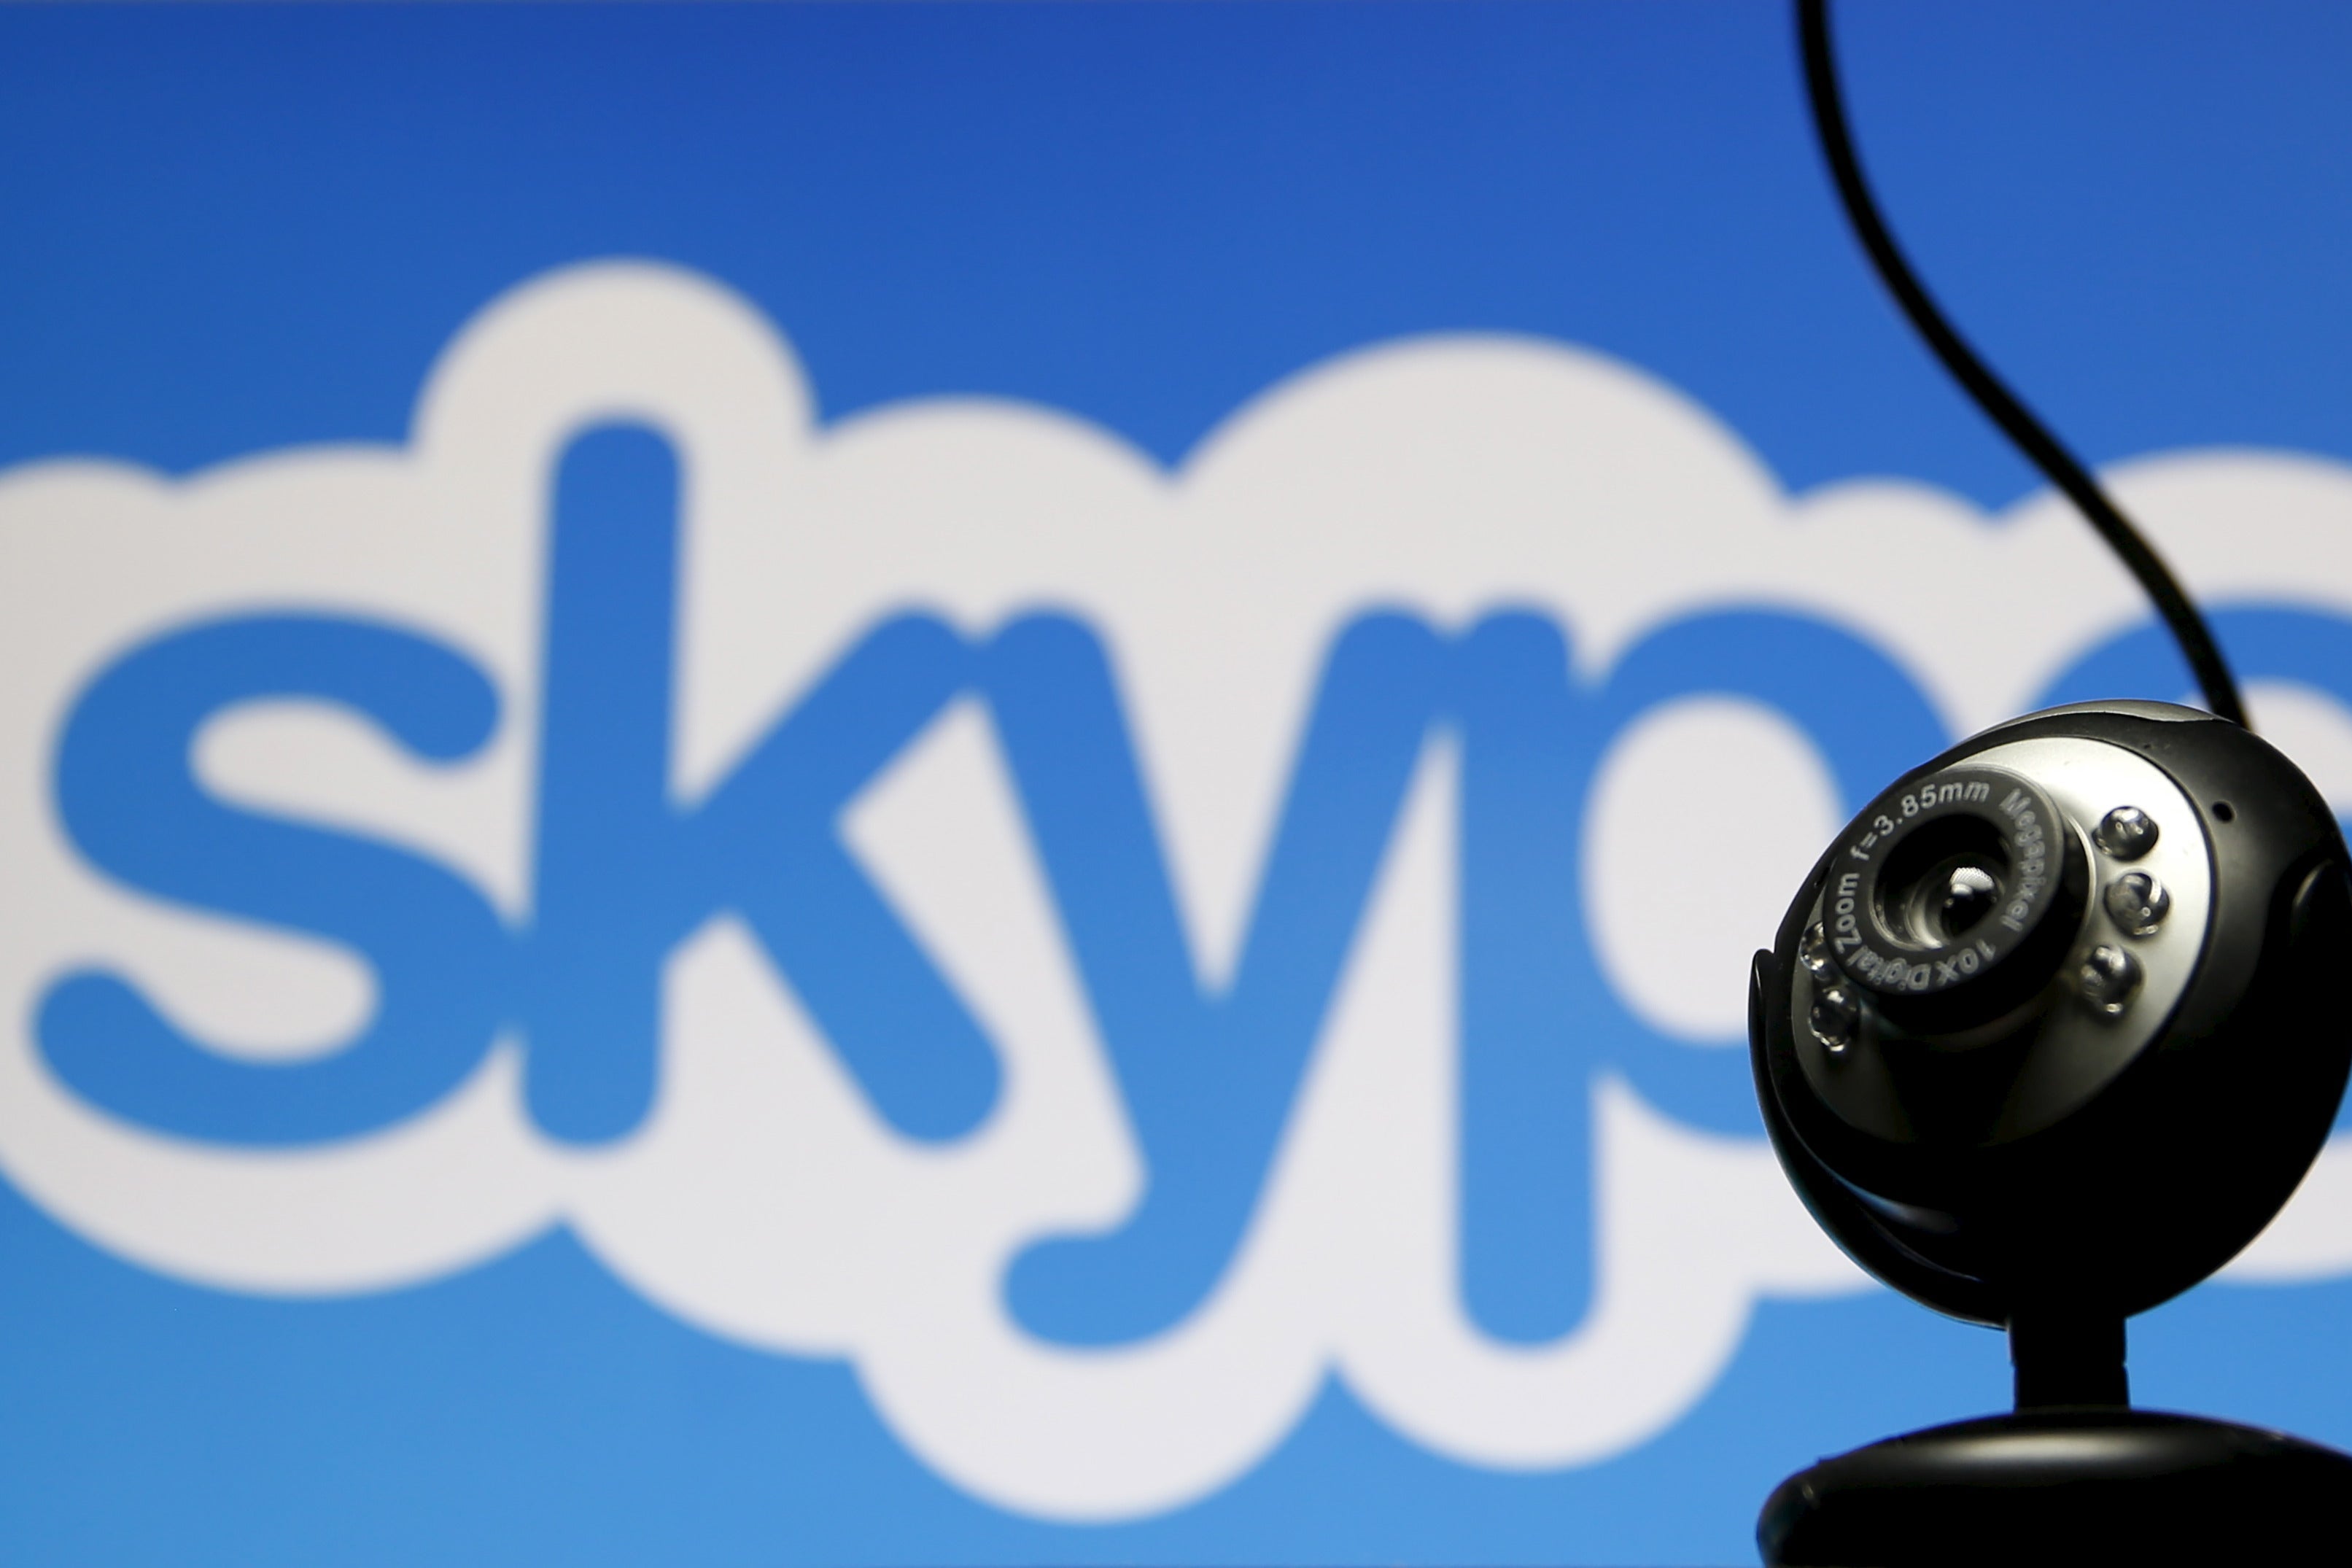 A webcam in front of the Skype logo